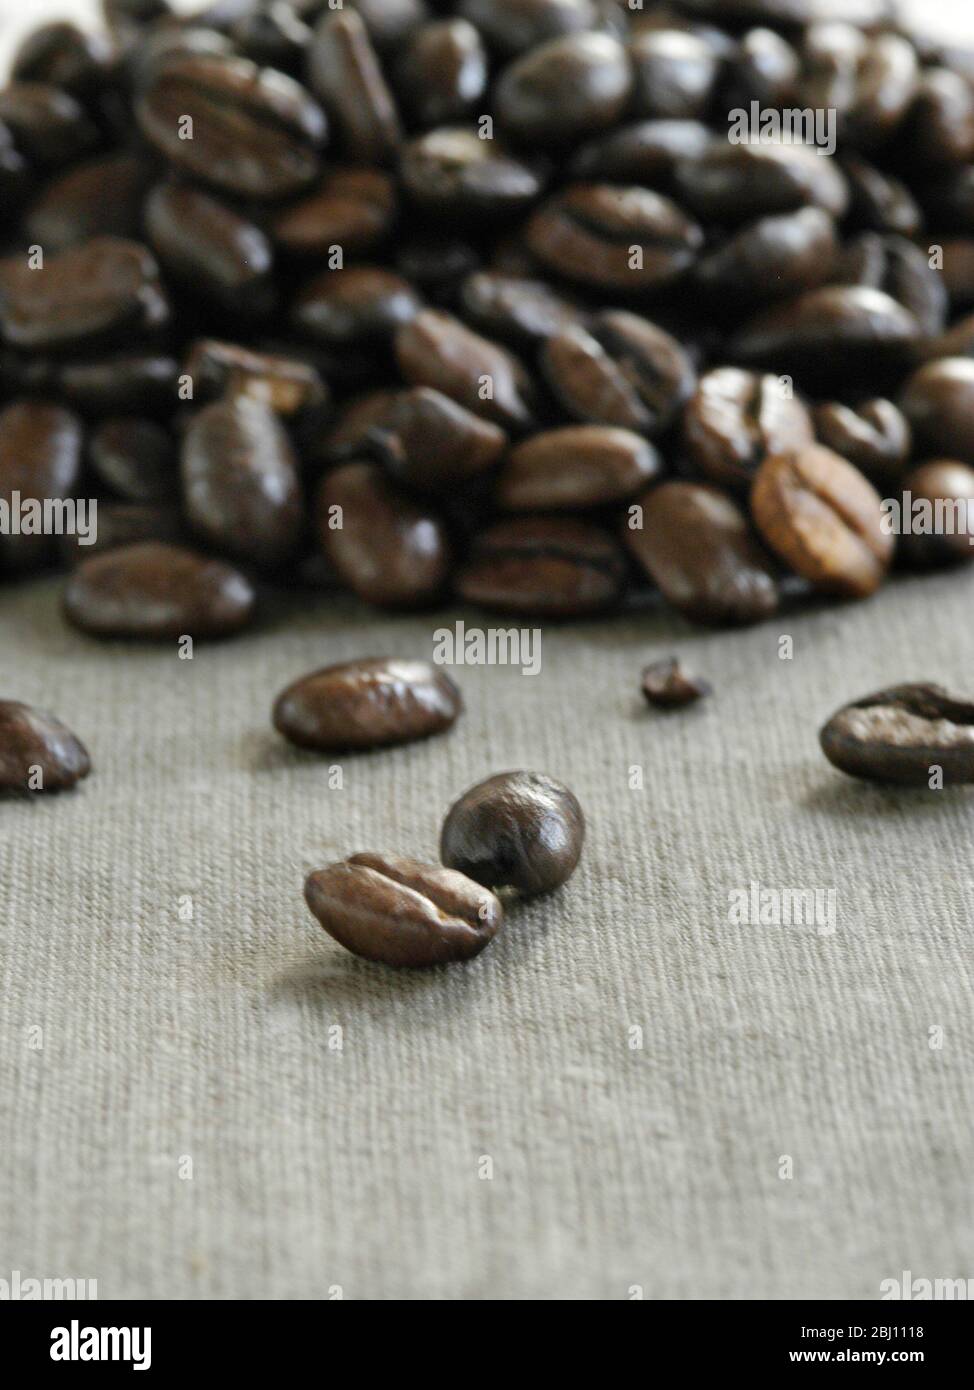 Heap of dark roasted coffee beans on canvas - Stock Photo